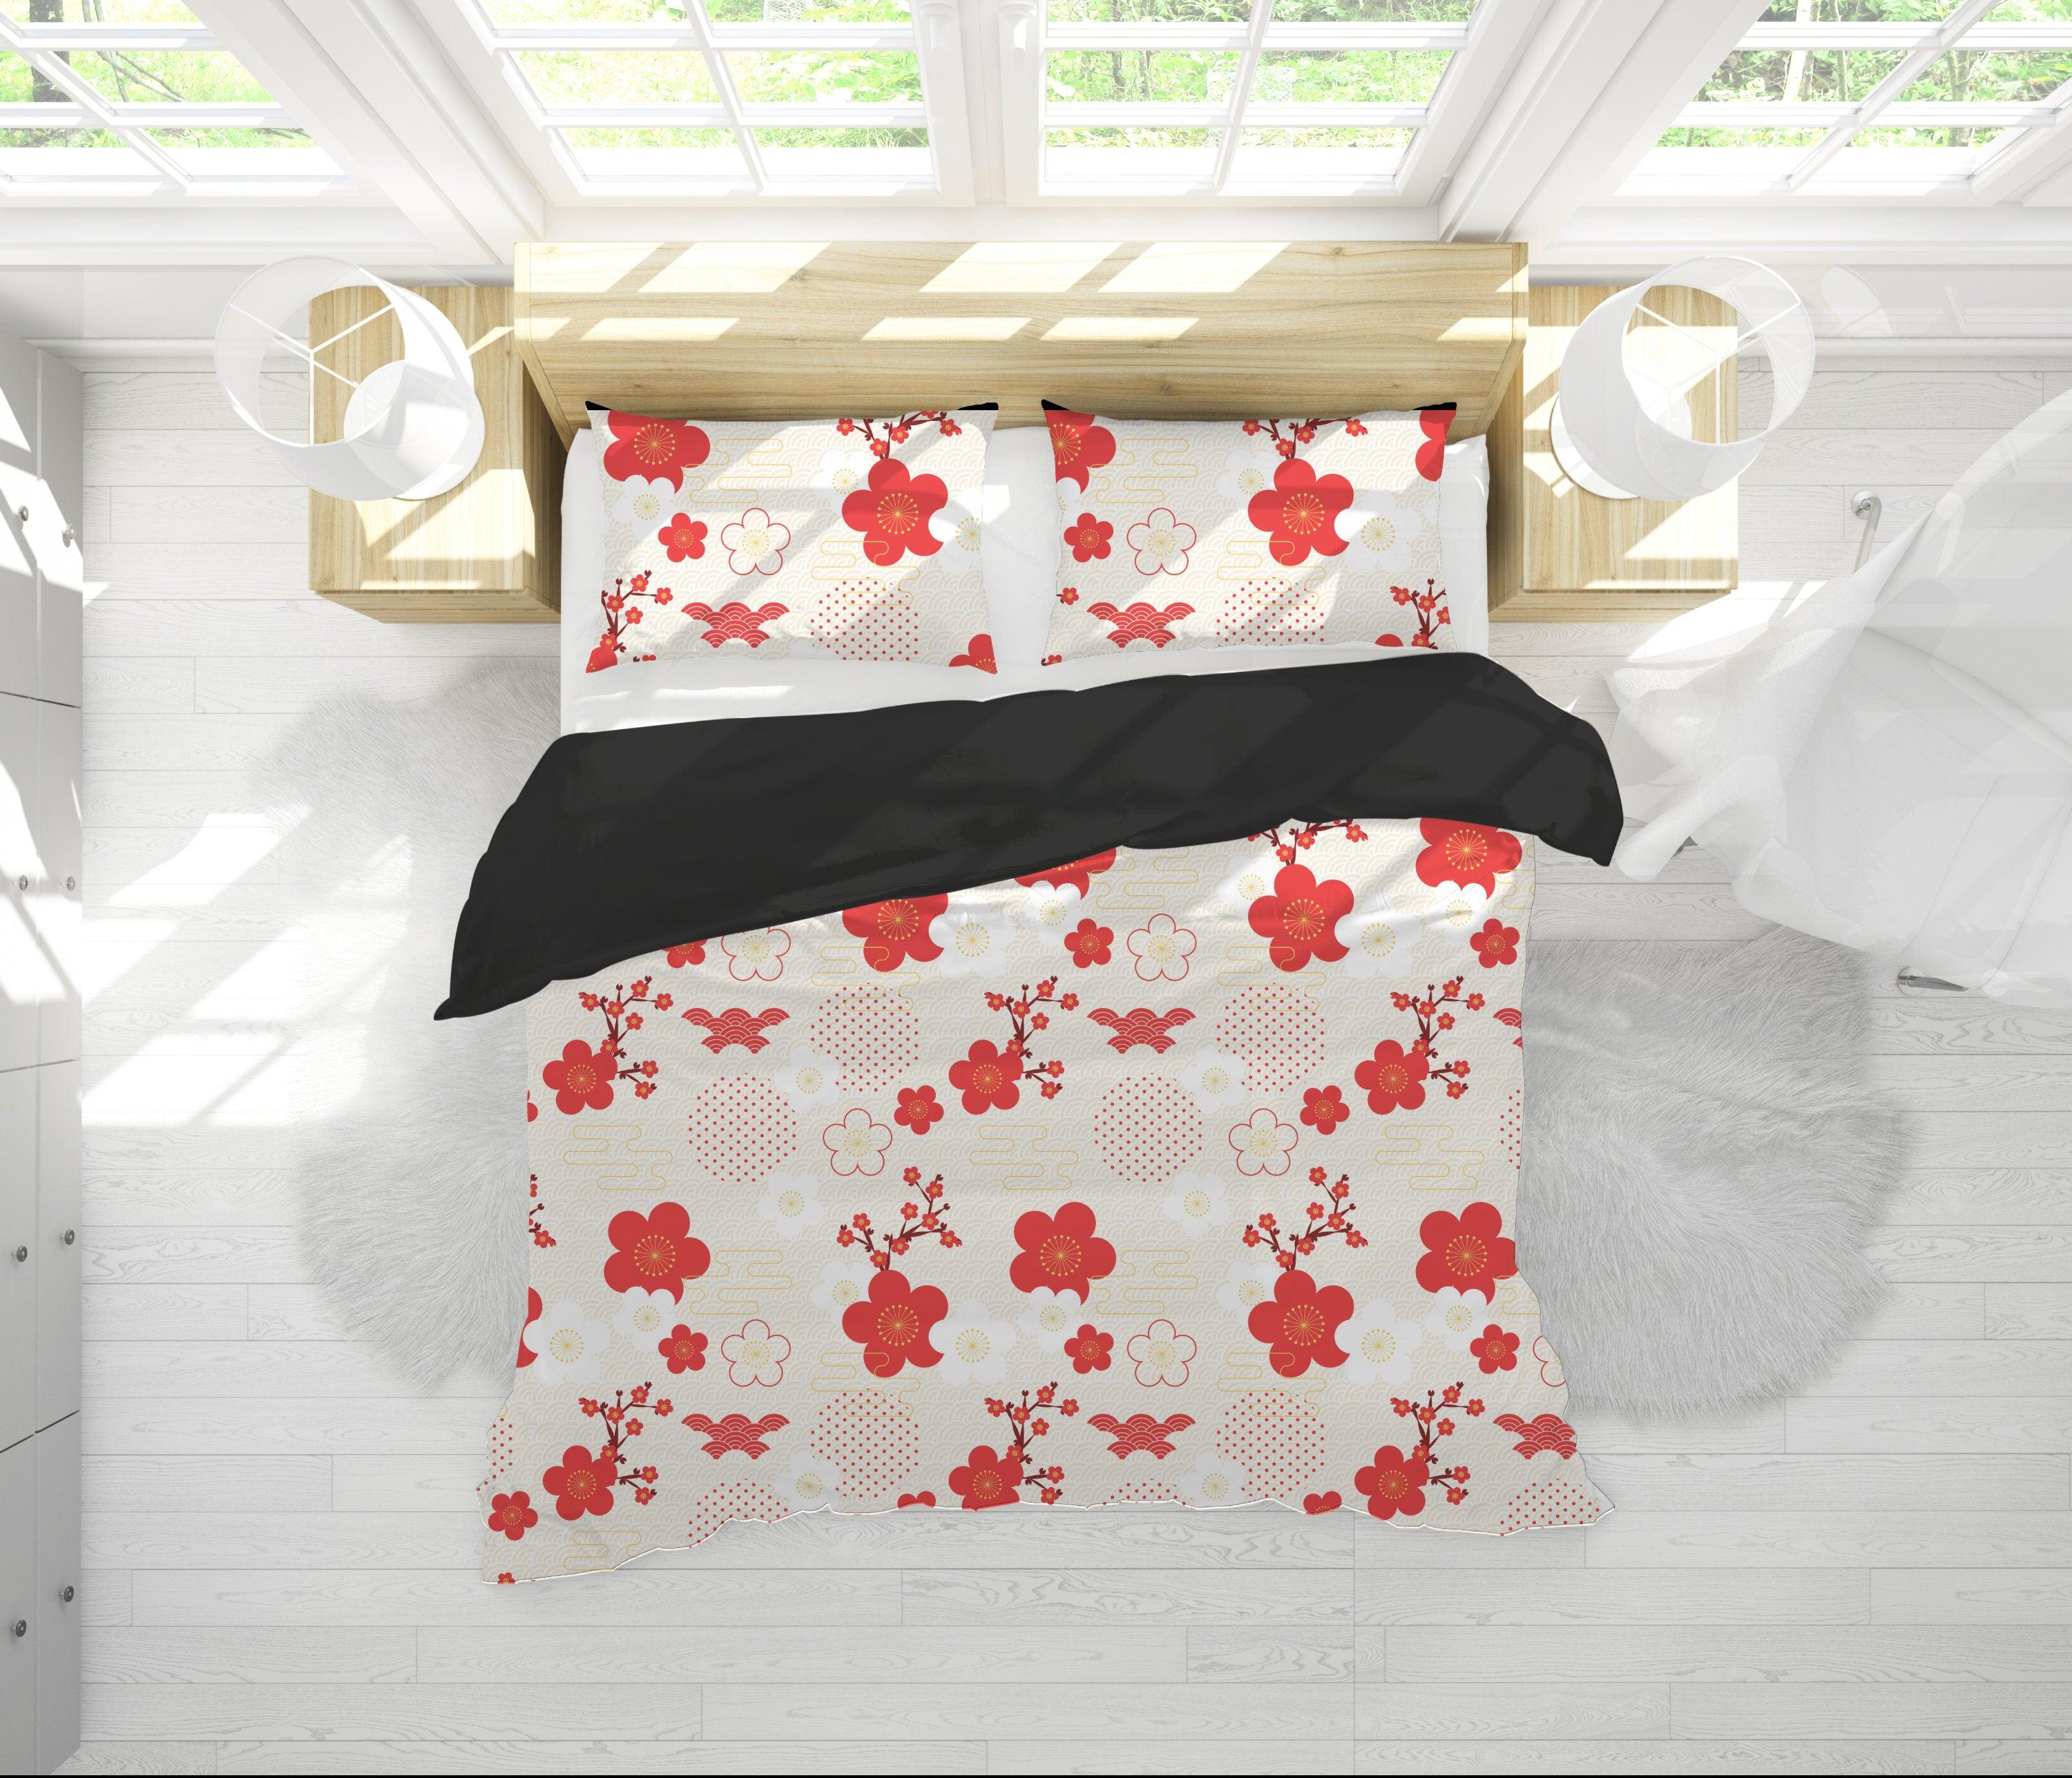 daintyduvet Japanese Cherry blossoms Duvet Cover Set Floral Prints | Bedding Set with Pillow Cover Case